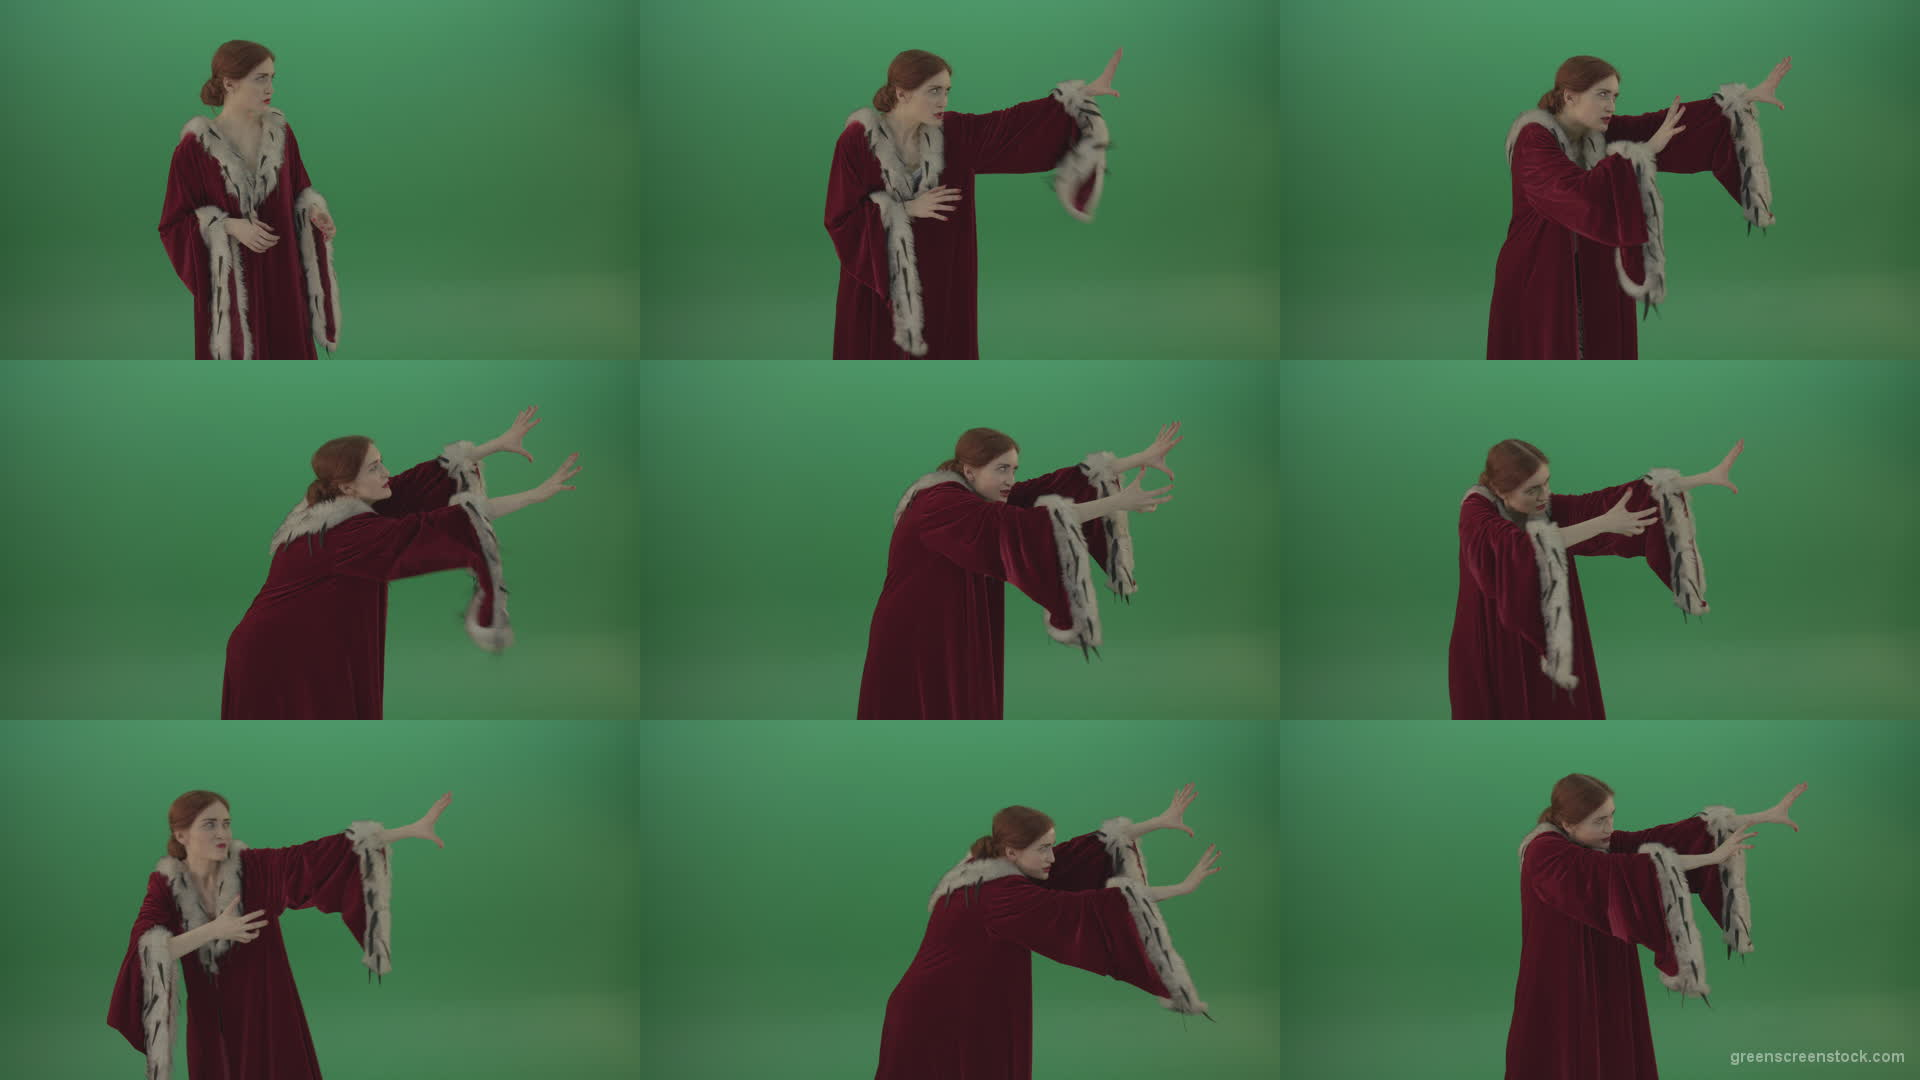 Girl-is-dressed-in-a-red-cloak-shoots-proton-lasers- Green Screen Stock